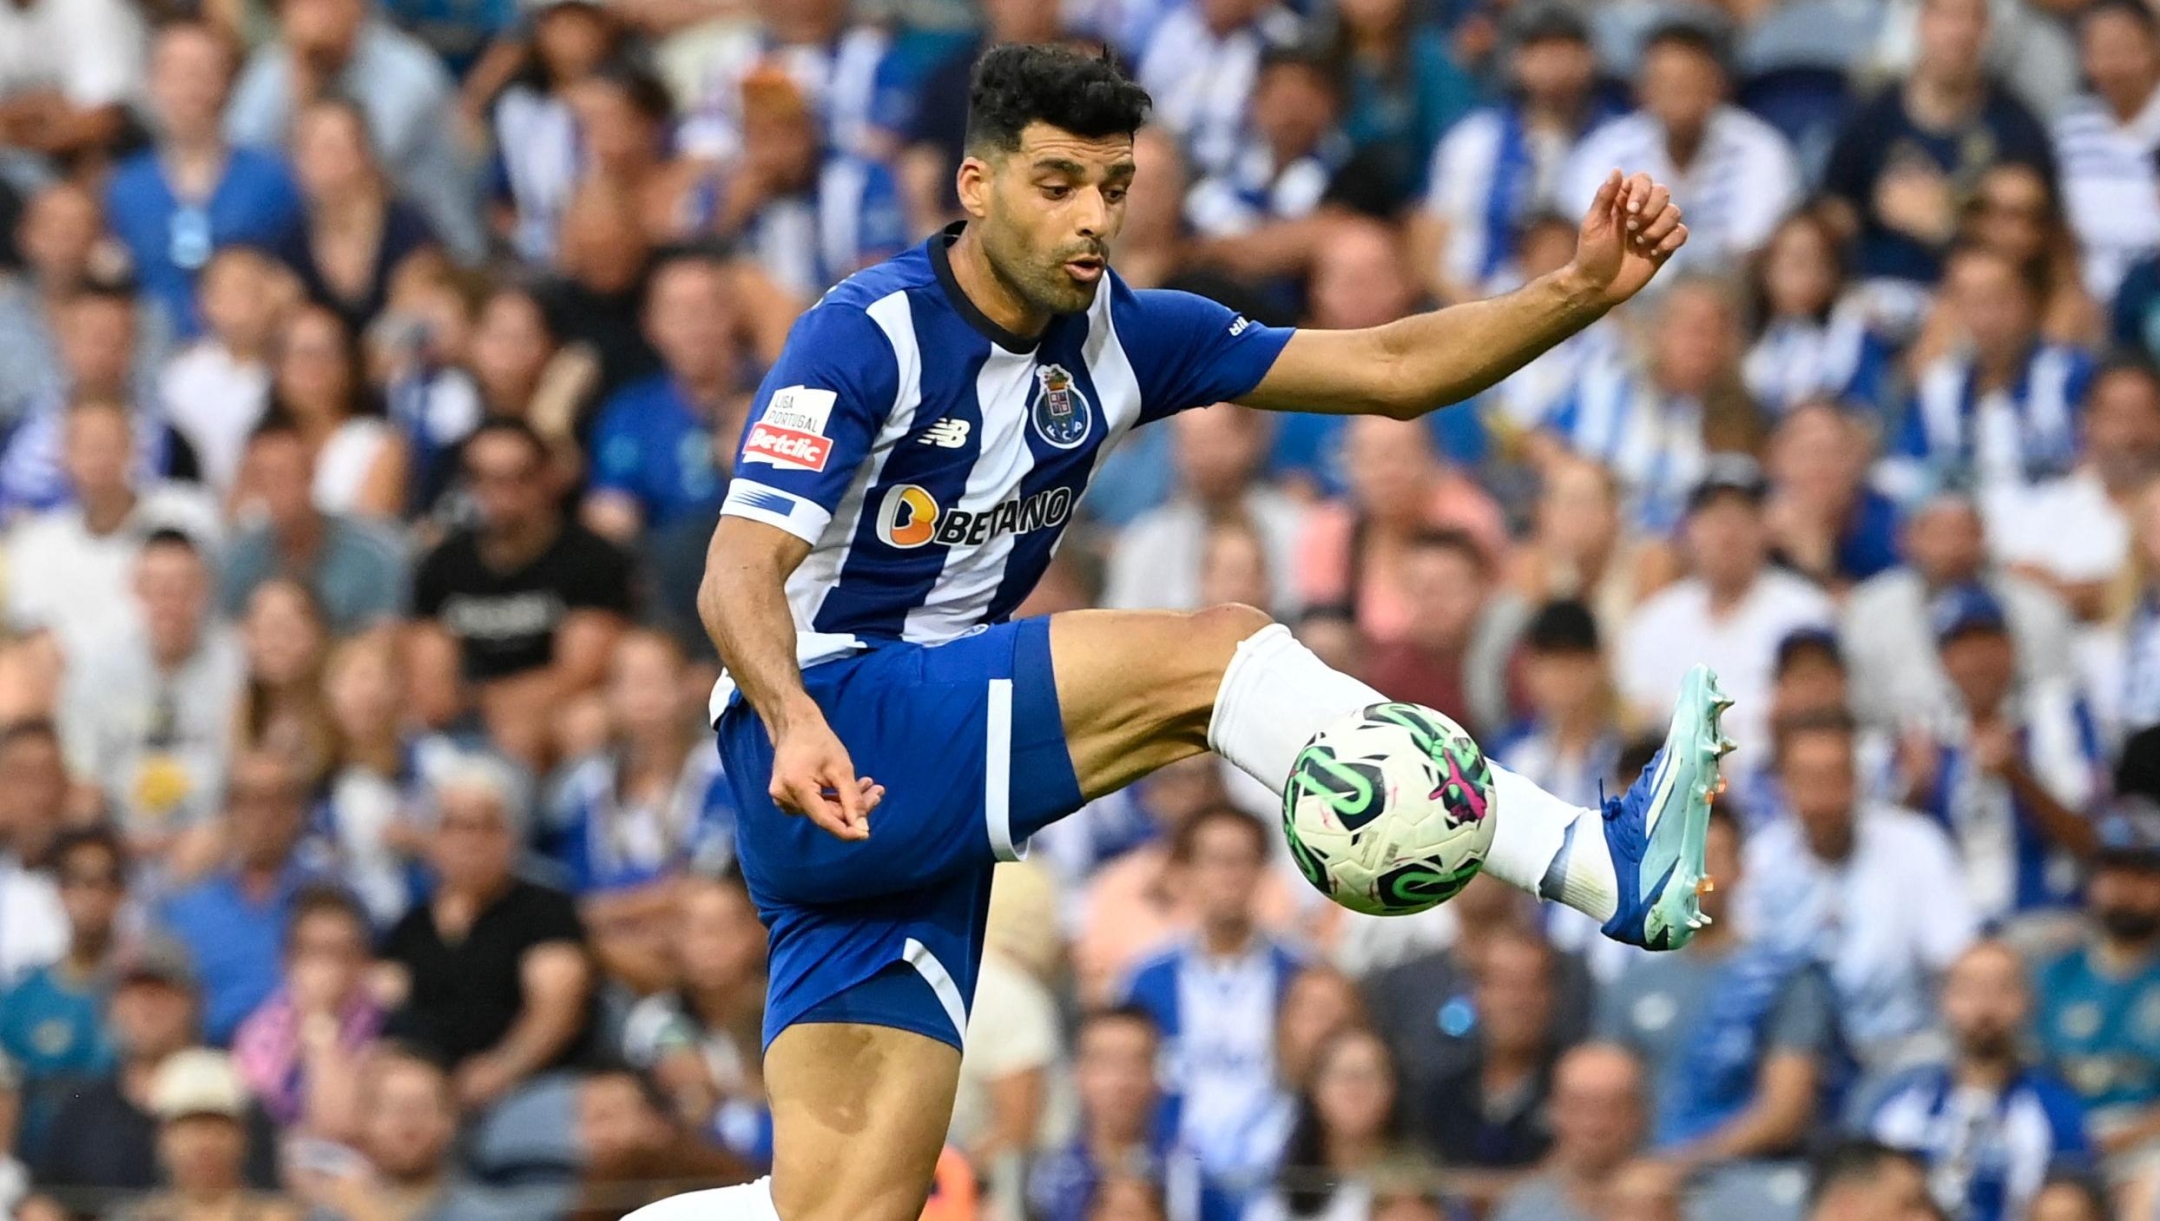 FC Porto's Iranian forward #09 Mehdi Taremi jumps for the ball during the Portuguese league football match between FC Porto and Portimonense SC at the Dragao stadium in Porto on October 8, 2023. (Photo by MIGUEL RIOPA / AFP)